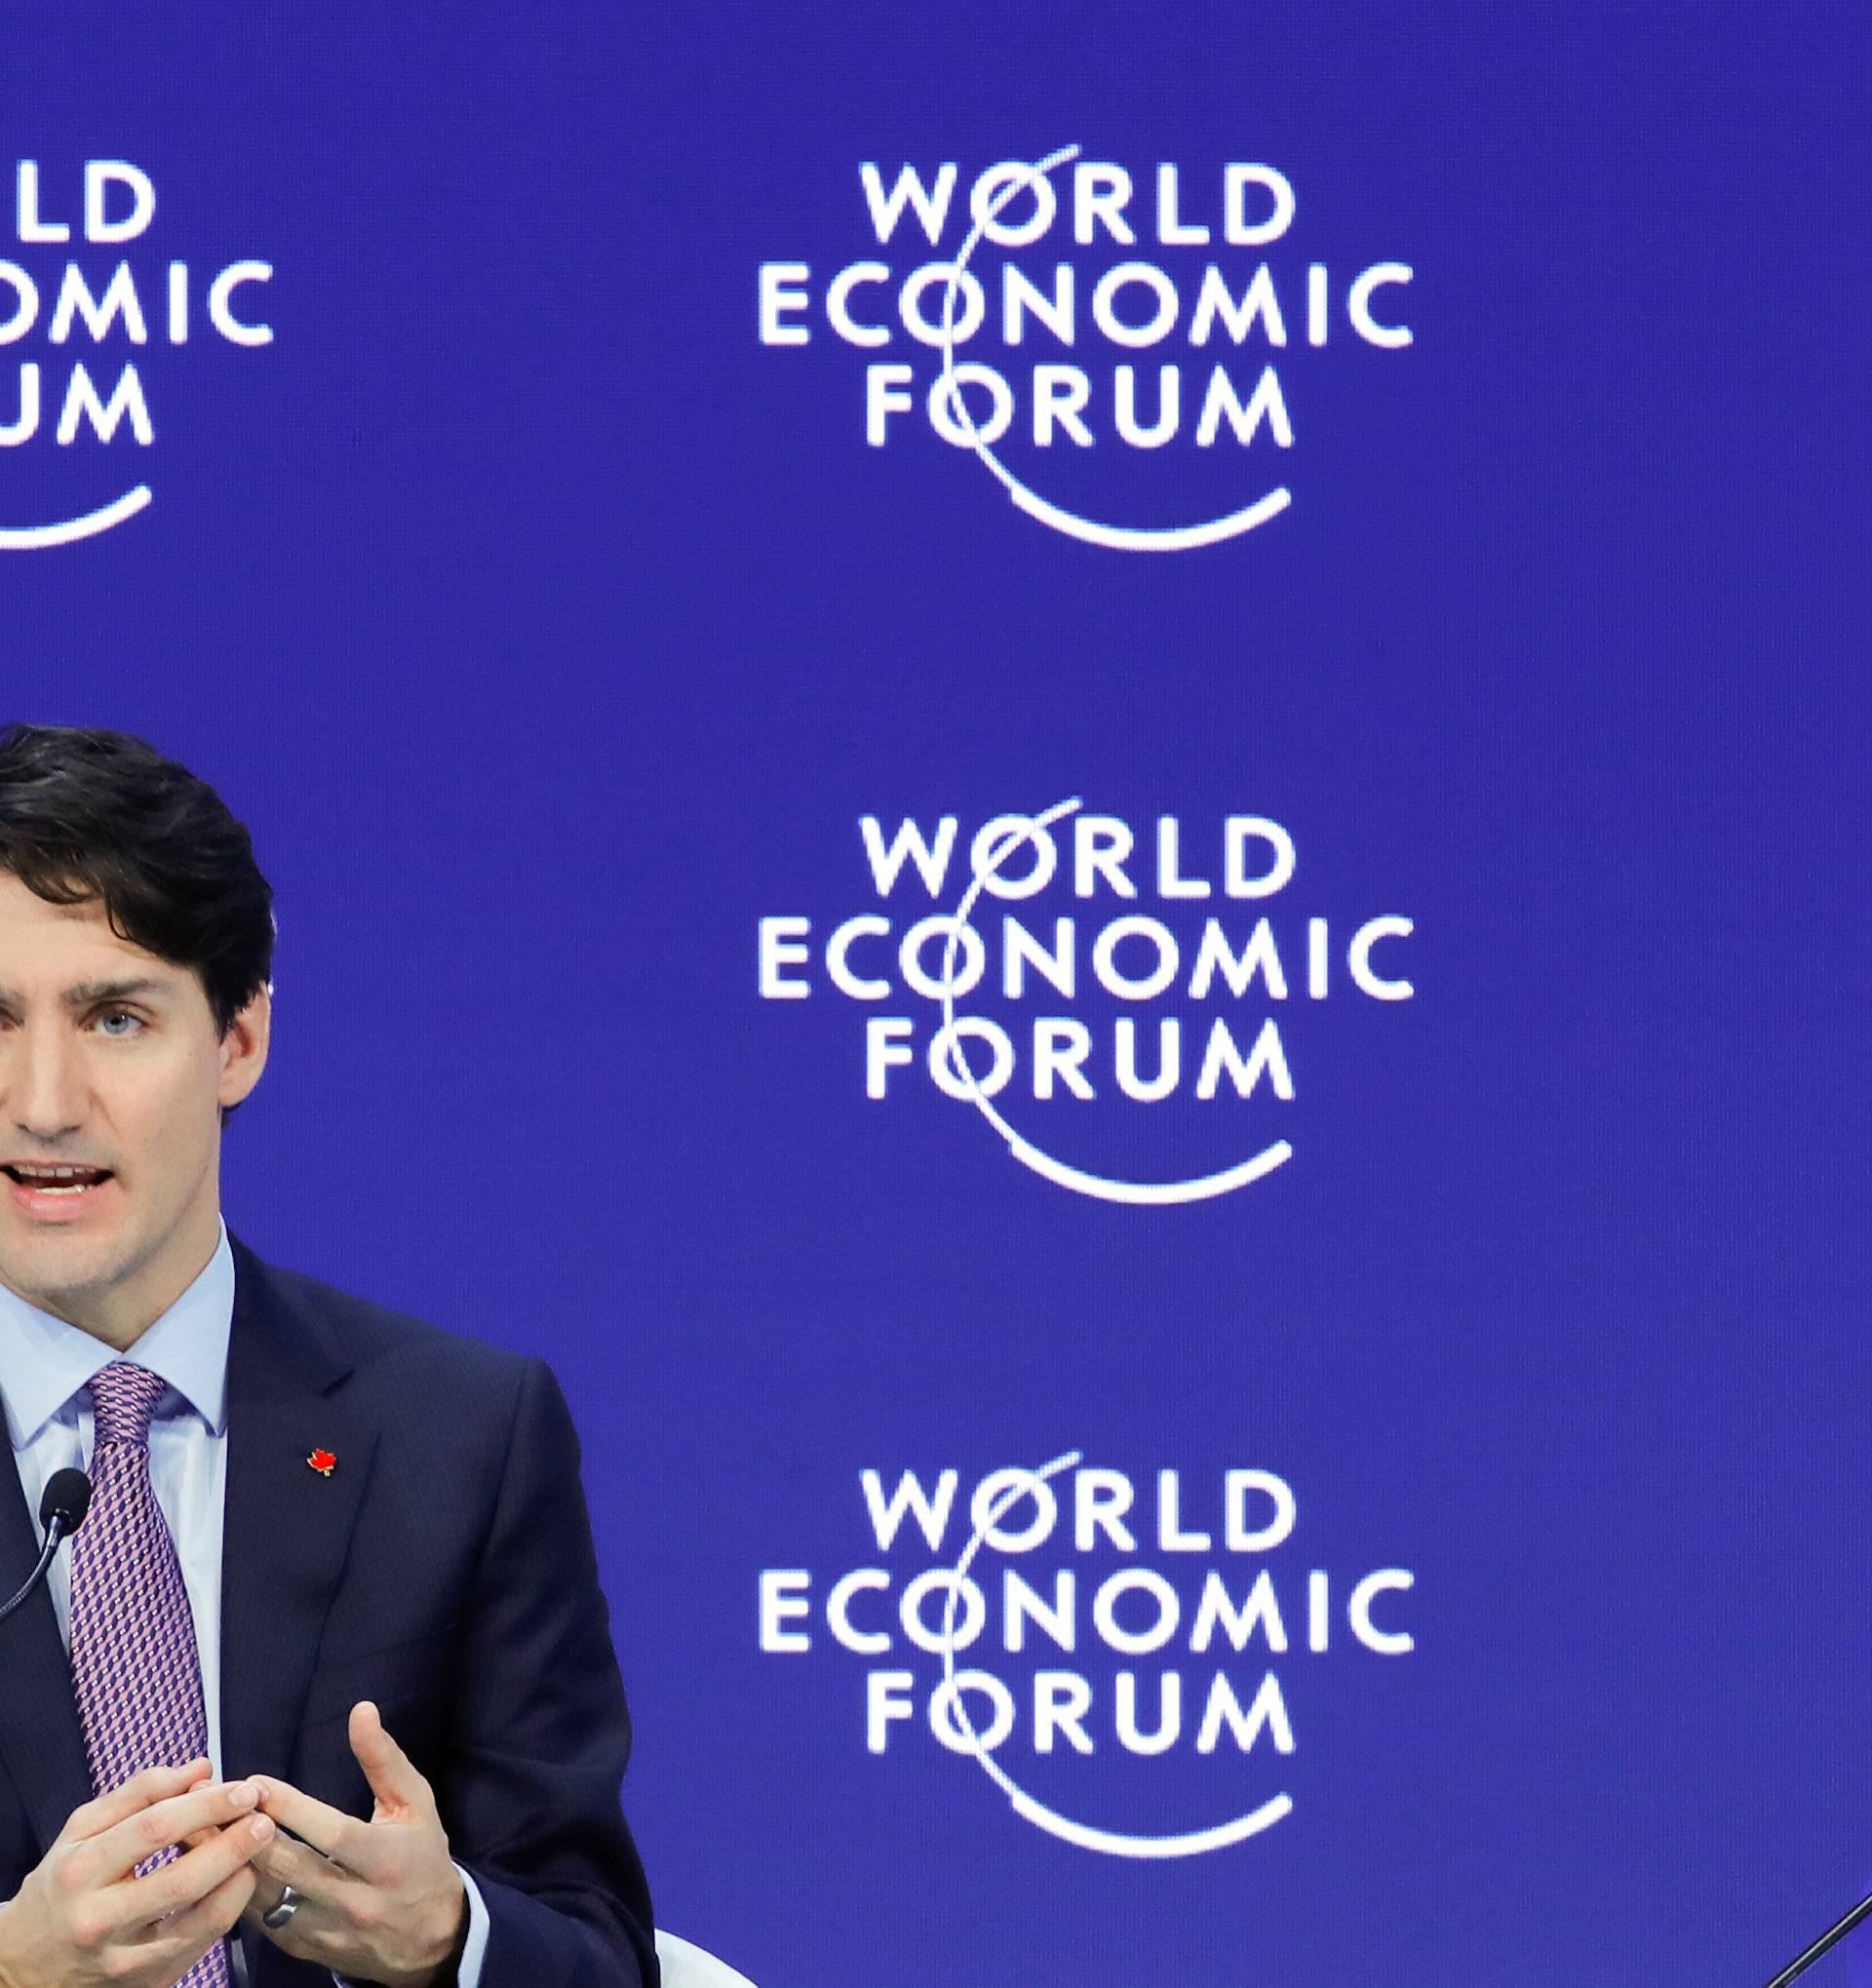 Canada's Prime Minister Justin Trudeau and Malala Yousafzai, Girls' Education Activist and Co-Founder of Malala Fund, attend the World Economic Forum (WEF) annual meeting in Davos